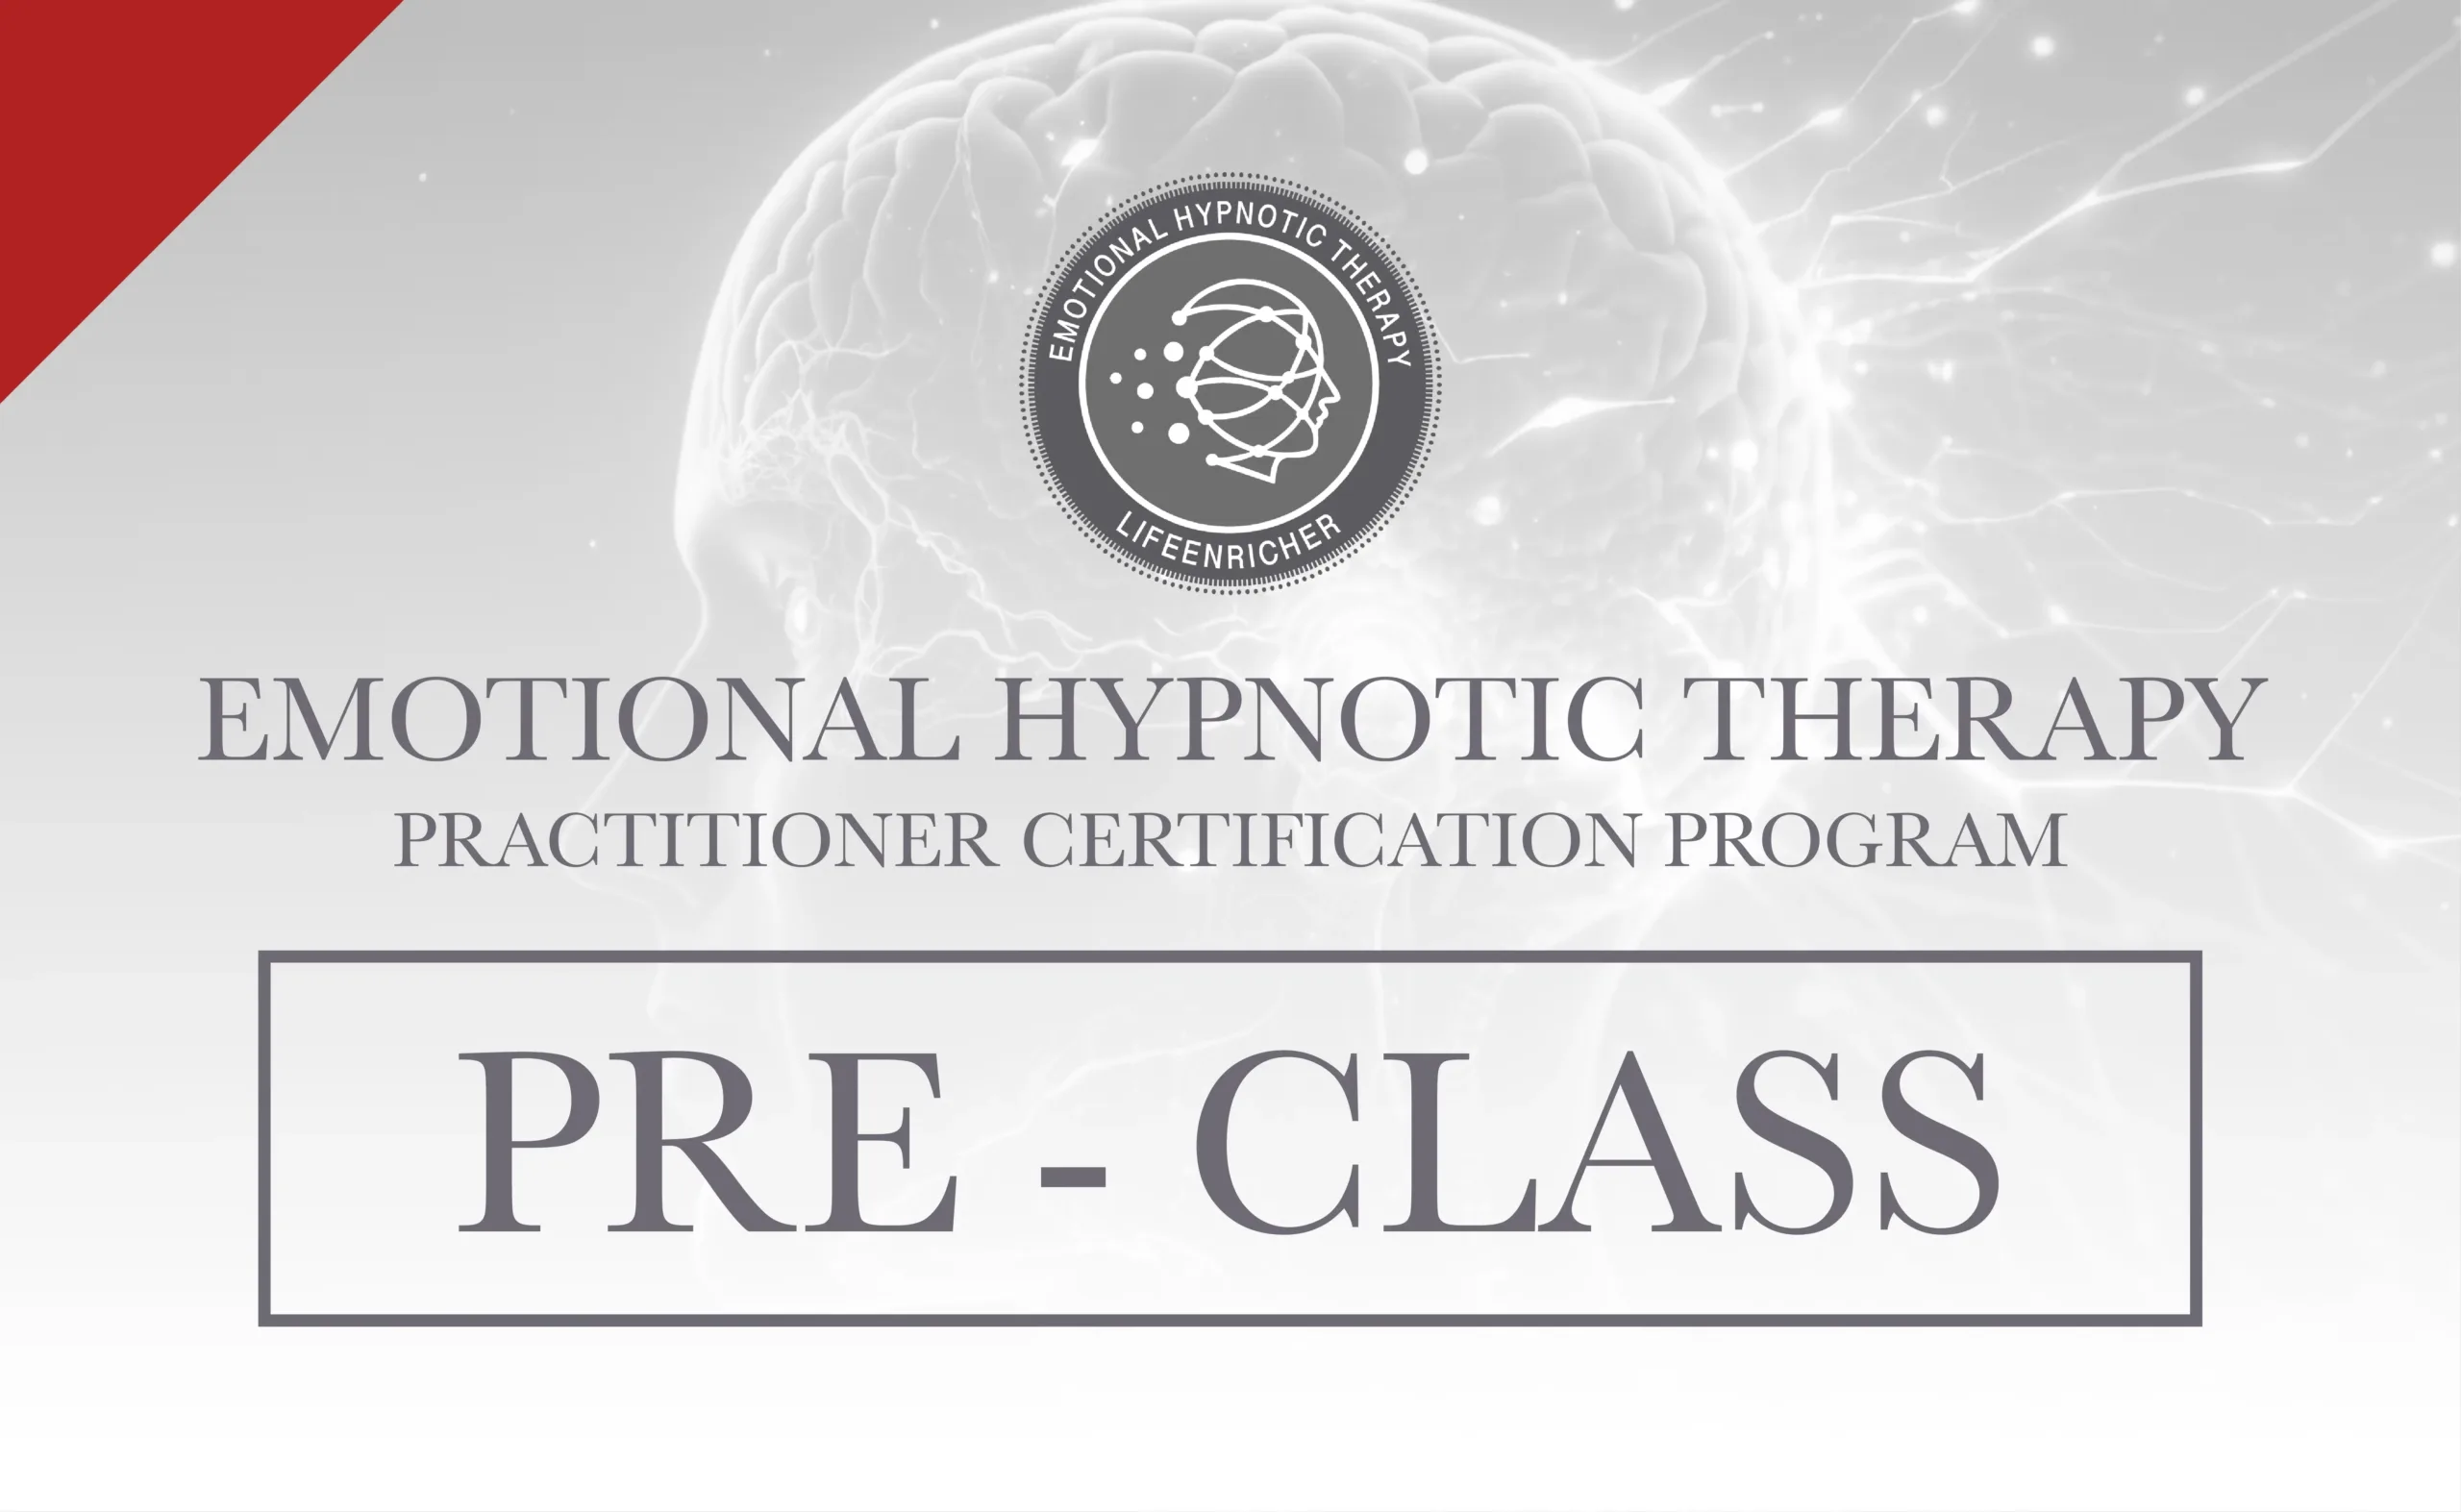 Emotional Hypnotic Therapy Practitioner – PRECLASS